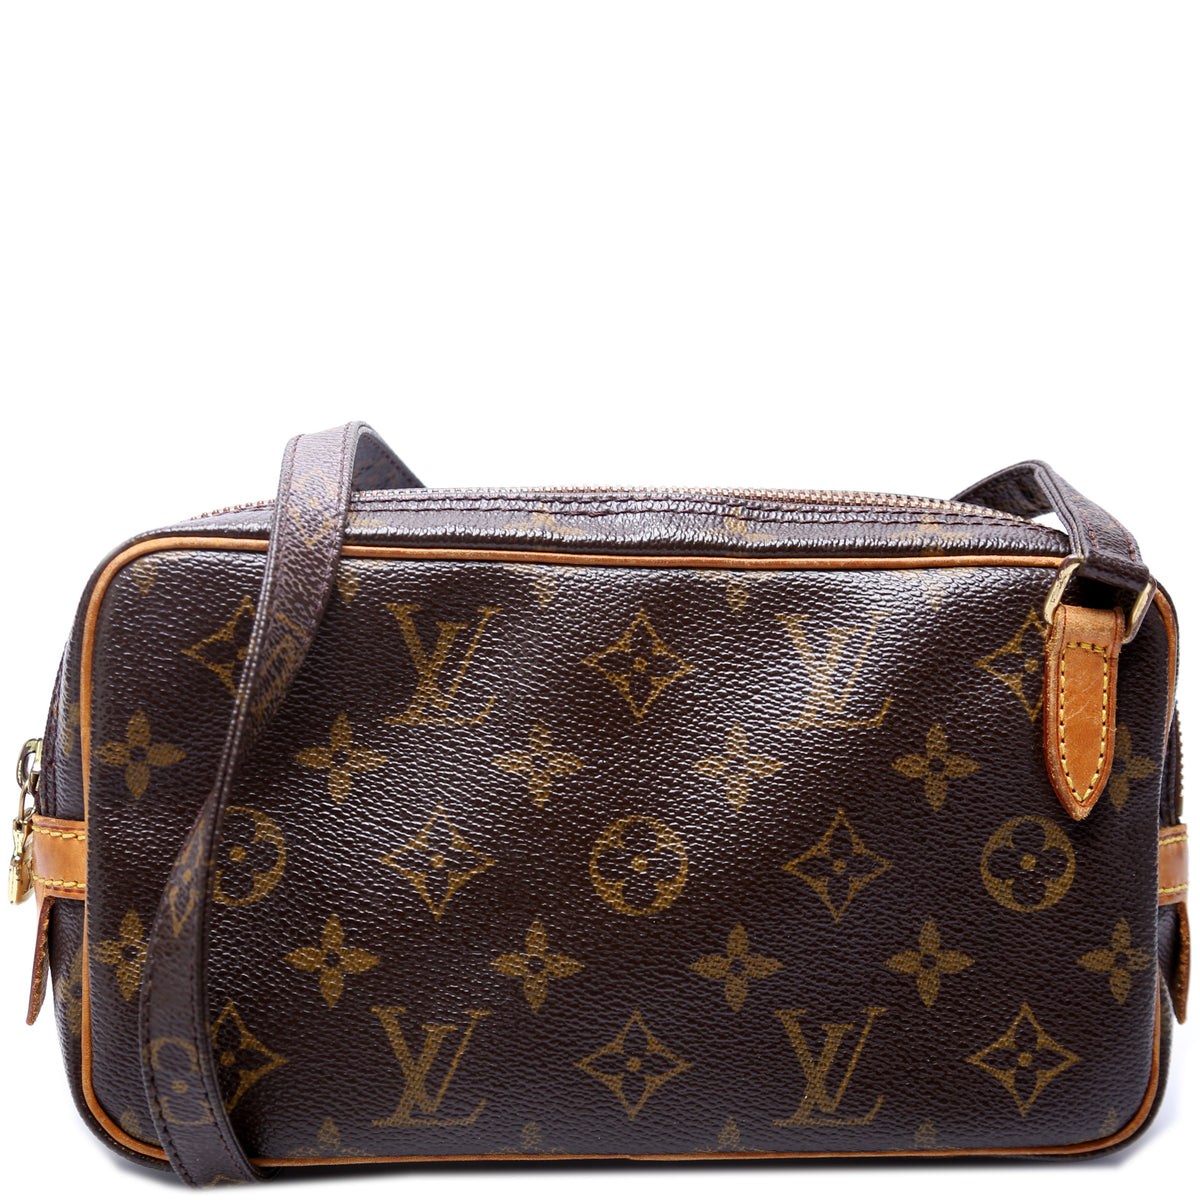 Louis Vuitton Marly Bandouliere crossbody bag